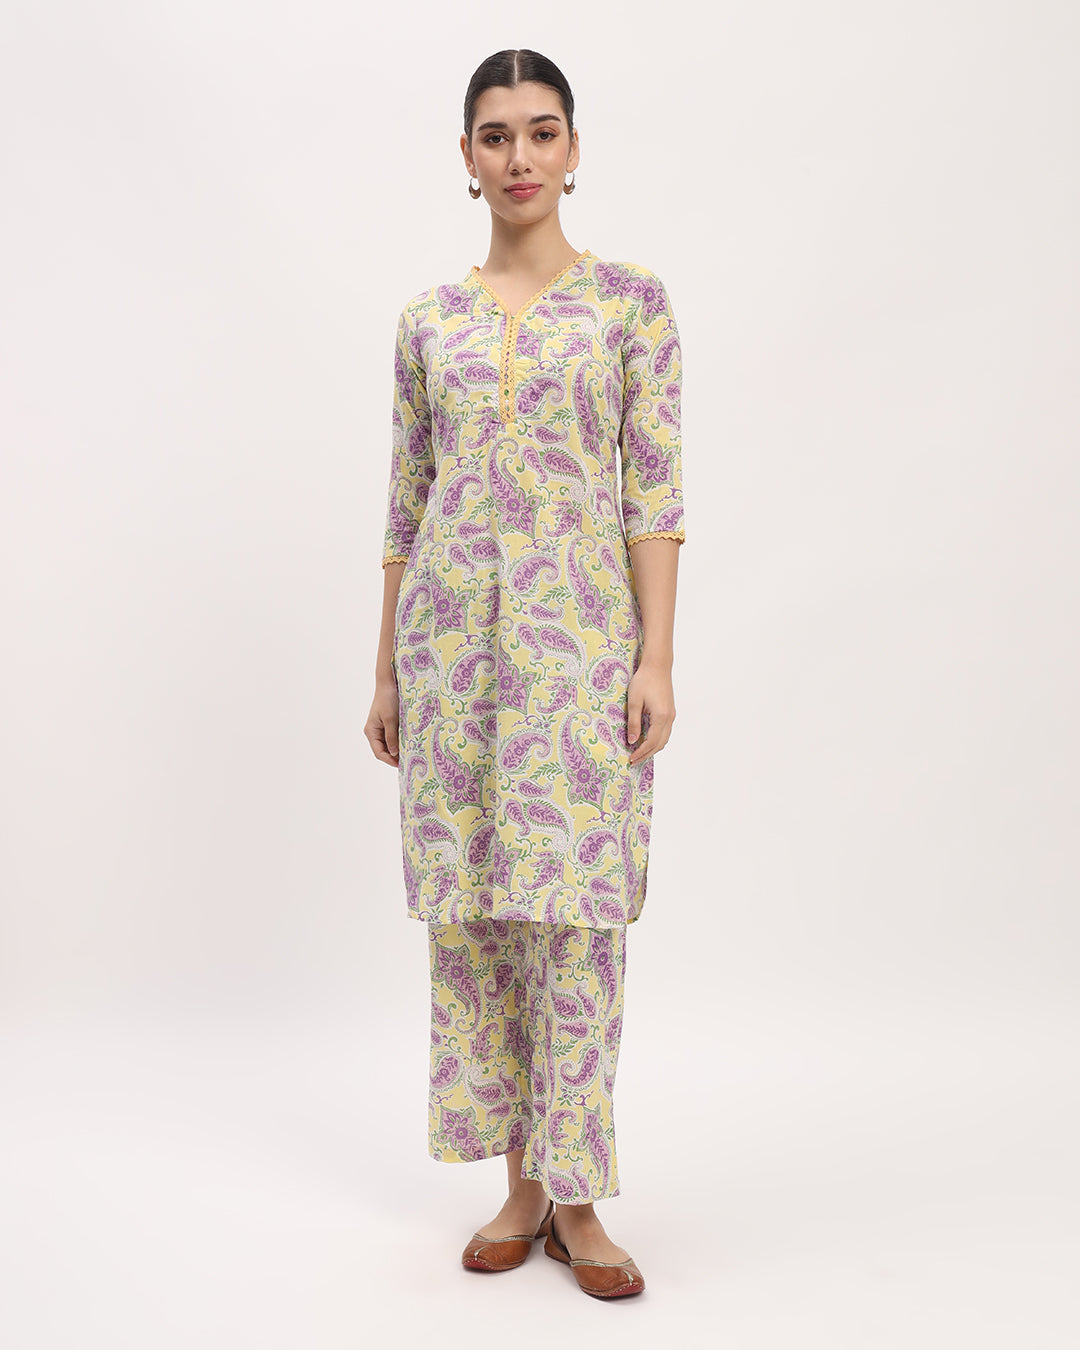 Combo: Lavender Paisley & English Floral Garden Lace Affair Printed Kurta (Without Bottoms)